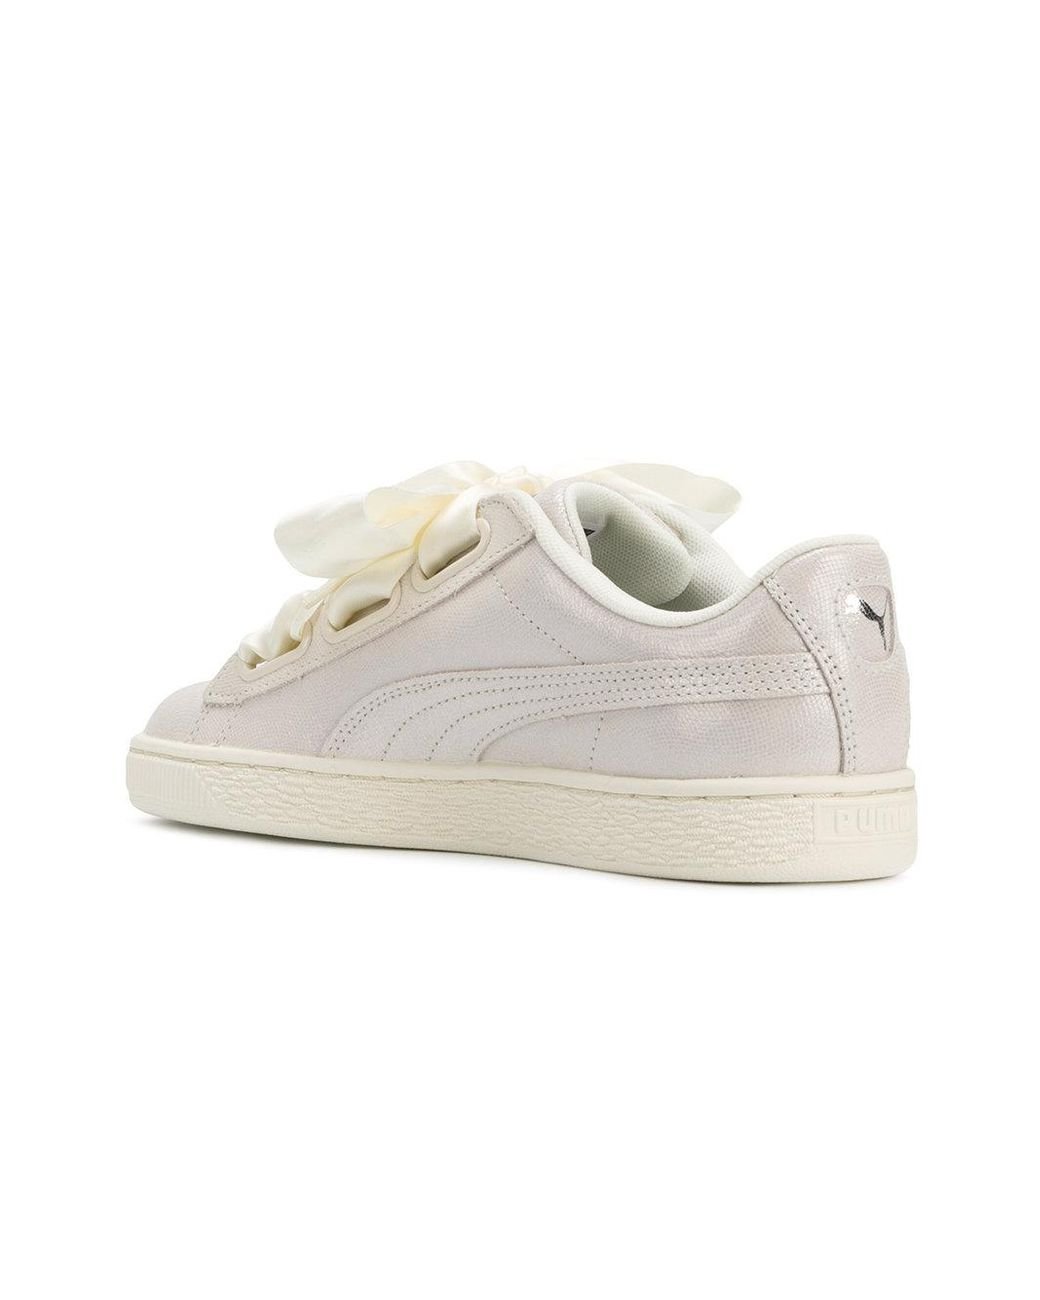 De stad Monografie Kers PUMA Lace-up Ribbon Sneakers in White | Lyst